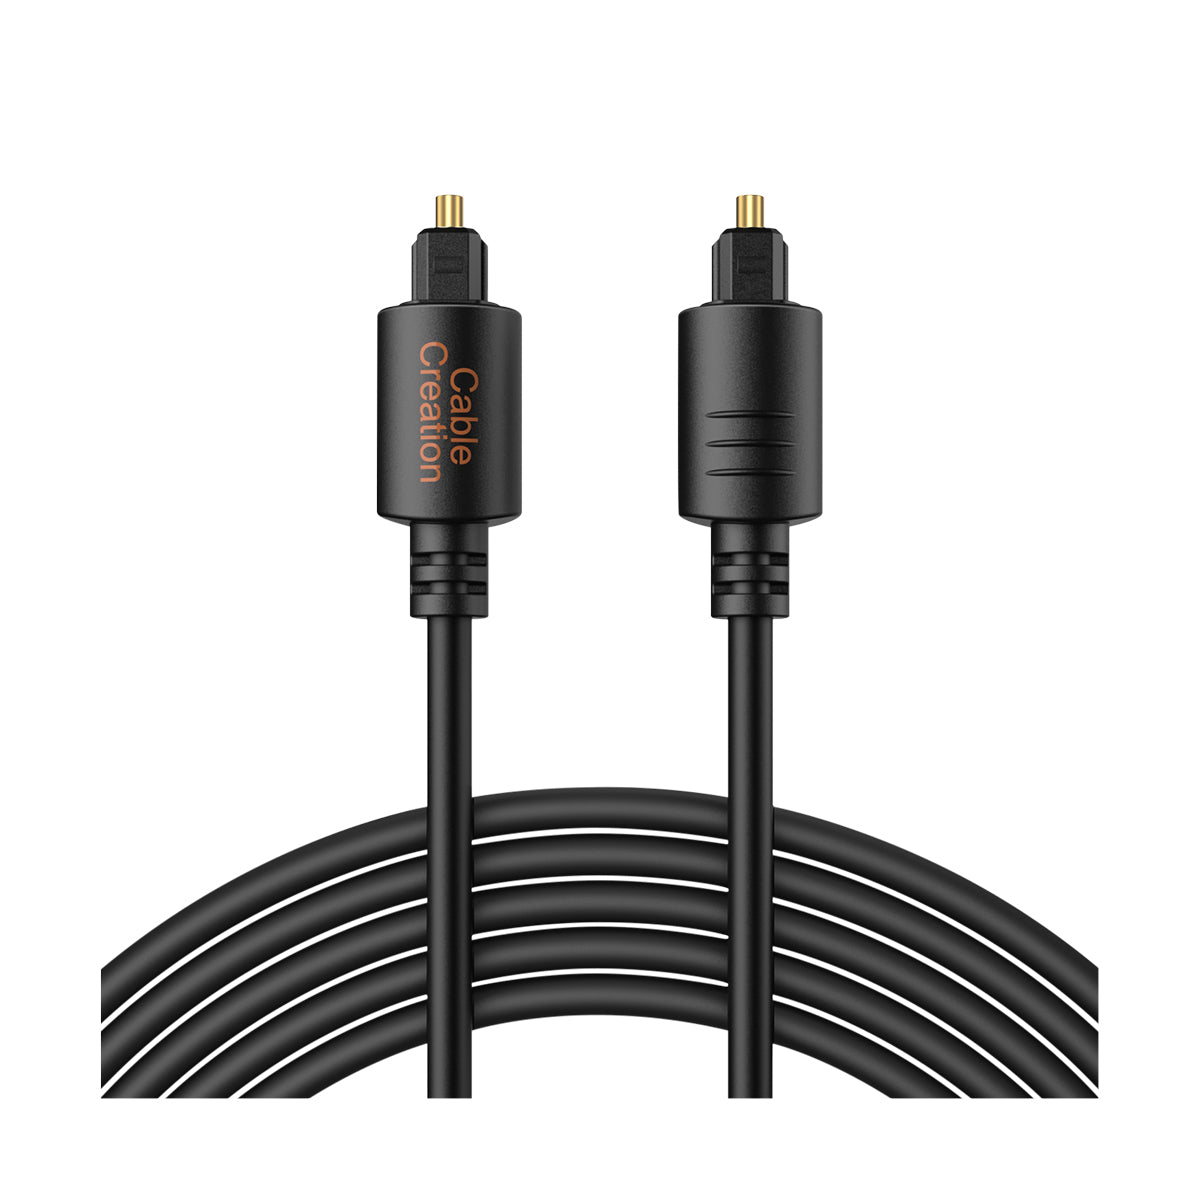 Optical Digital Audio Cable 15FT